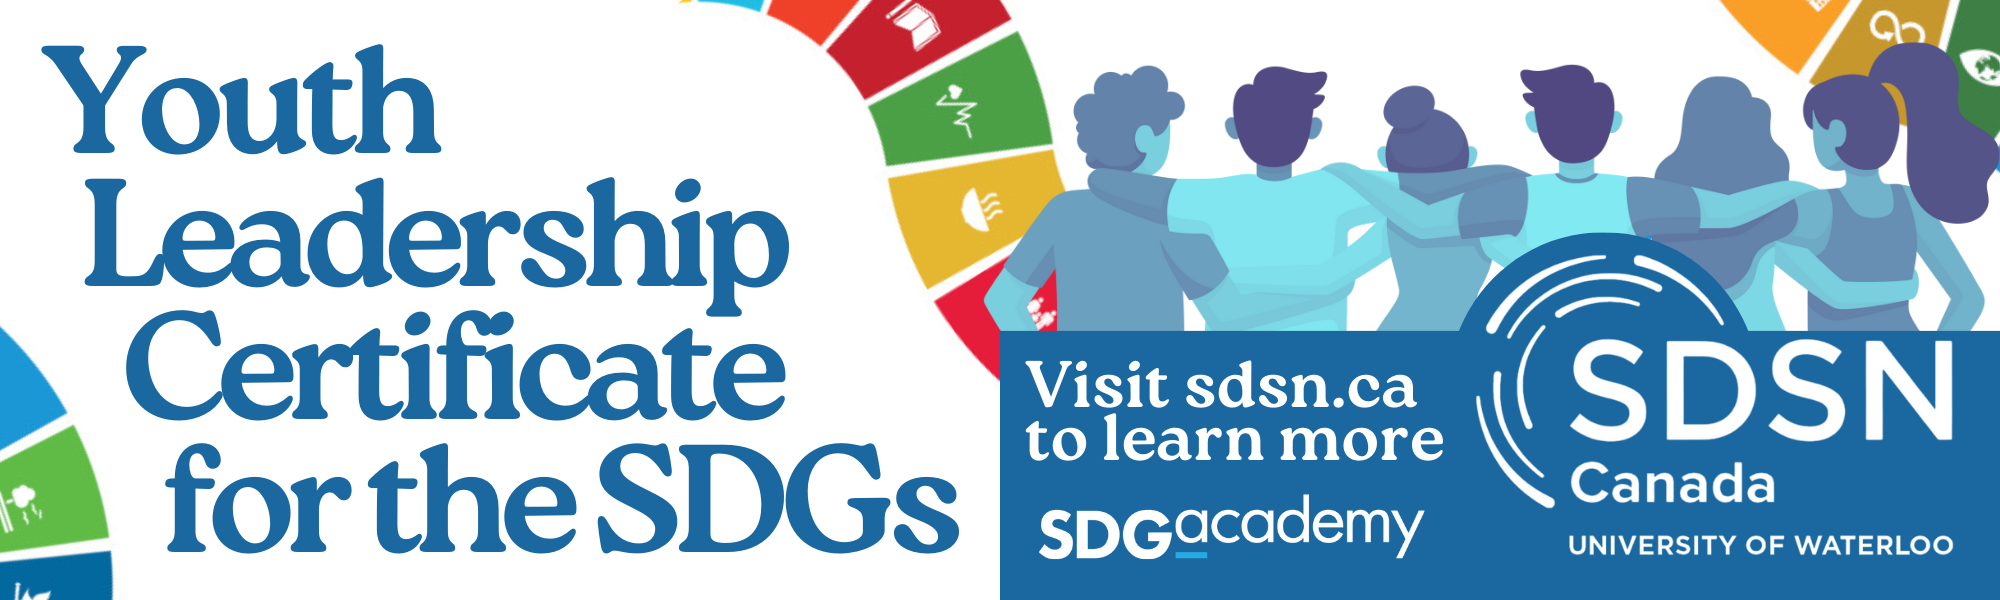 image of young people with sdg icons in background